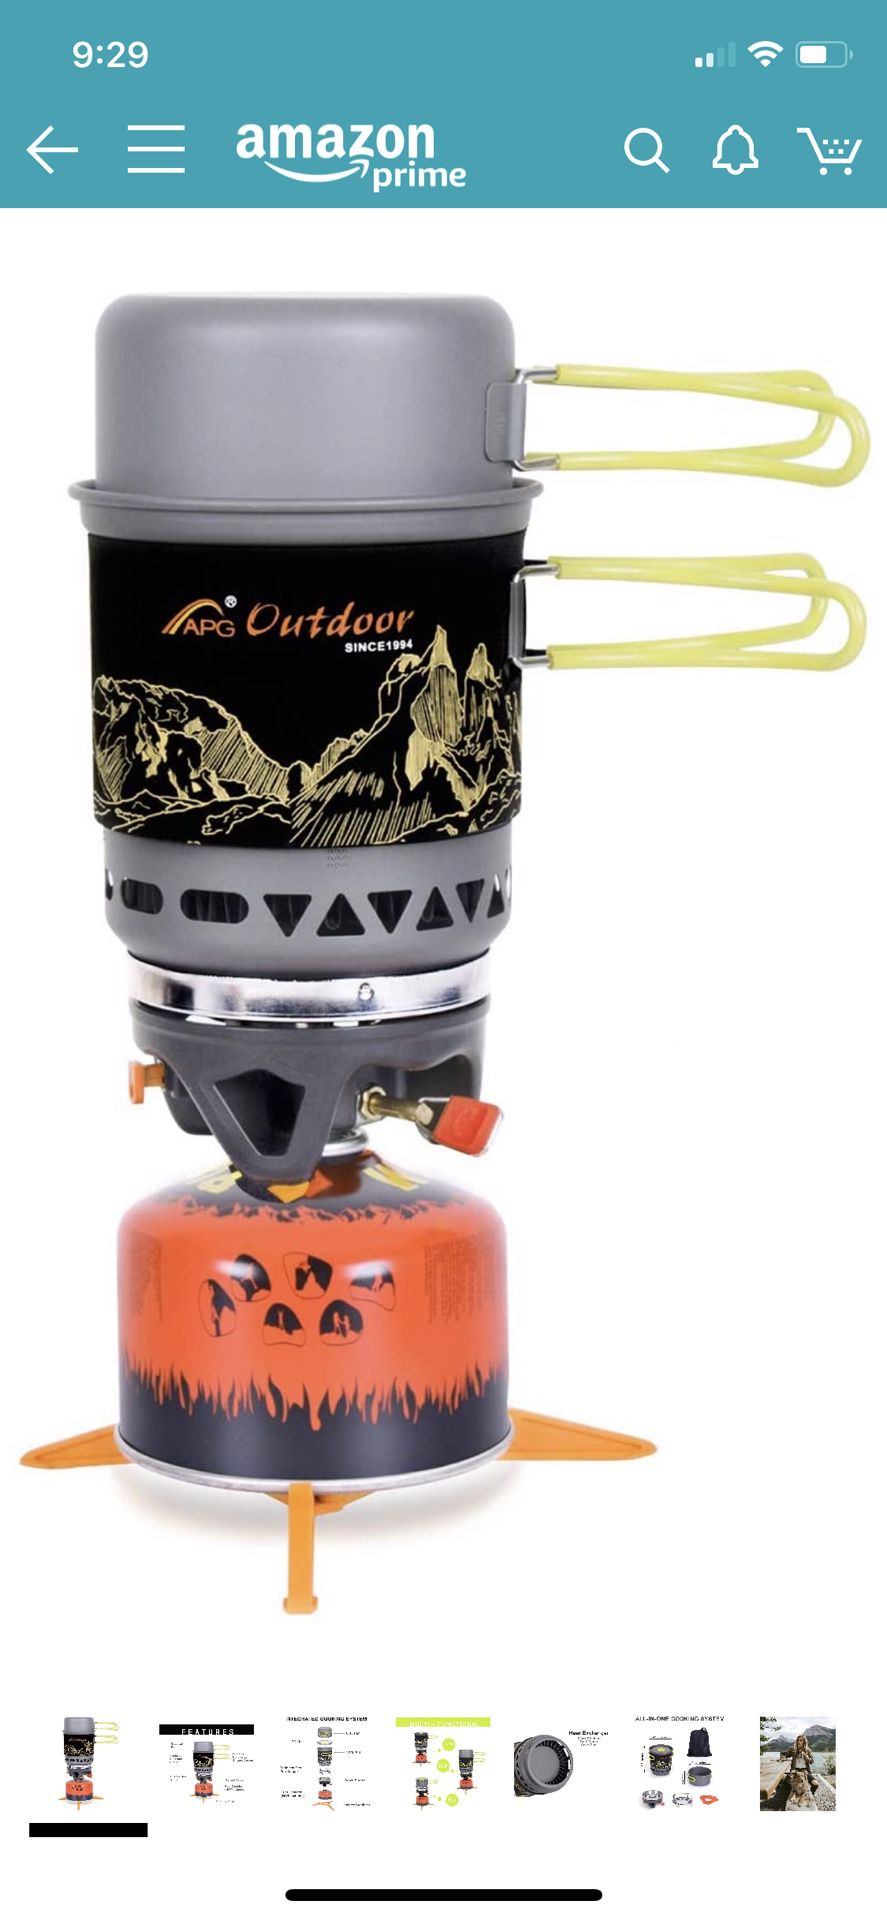 Brand new 2-in-1 Backpacking Camping Stove